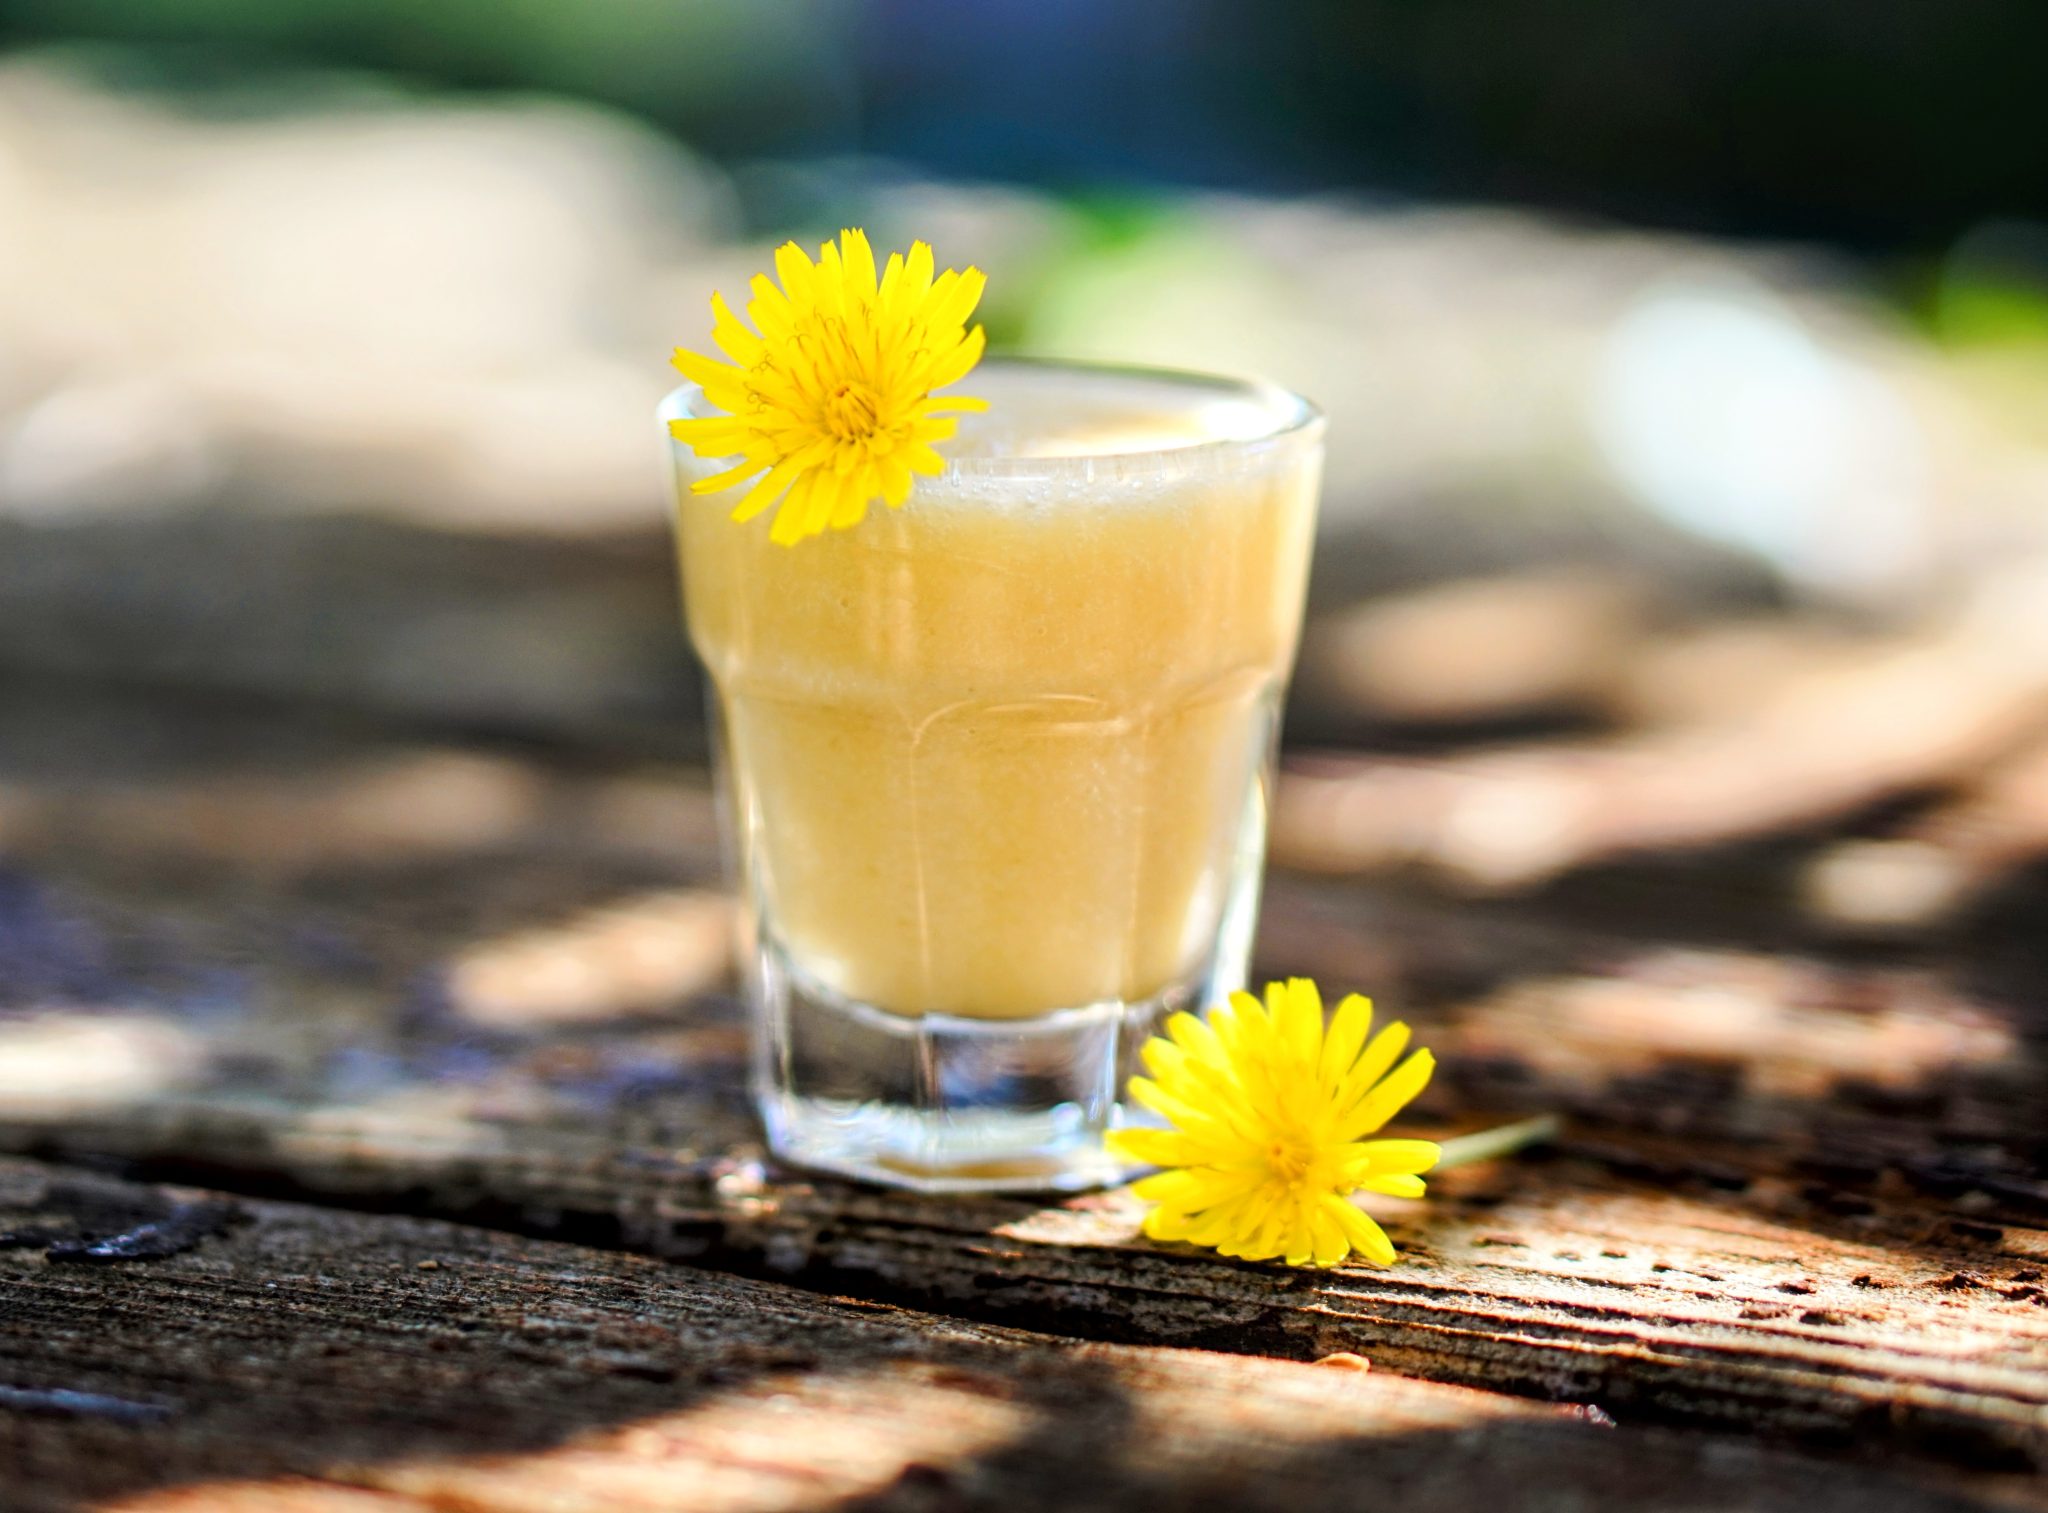 Yellow juice adorned with a yellow flower.